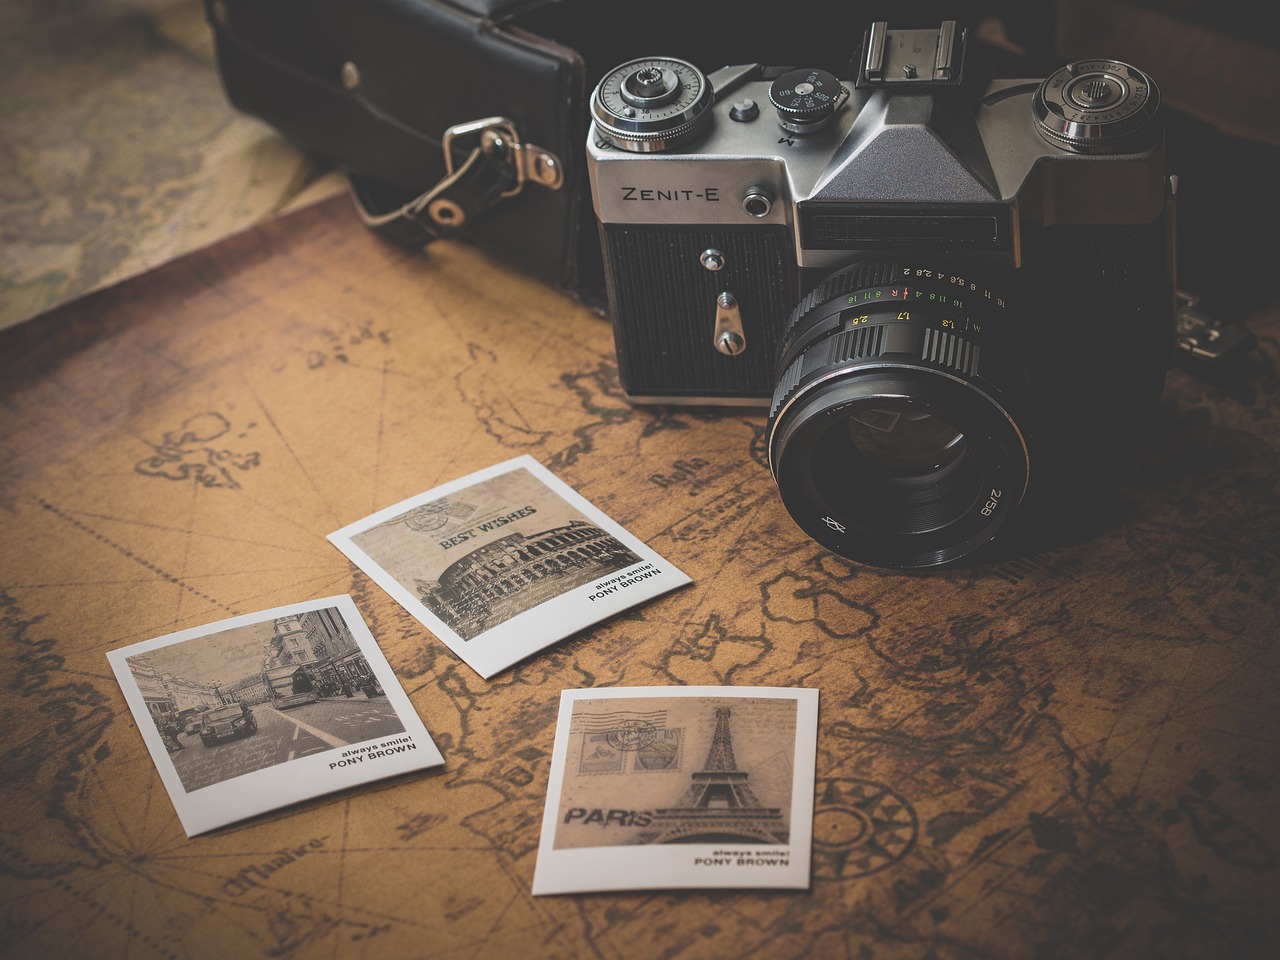 Vintage camera and map with travel photos